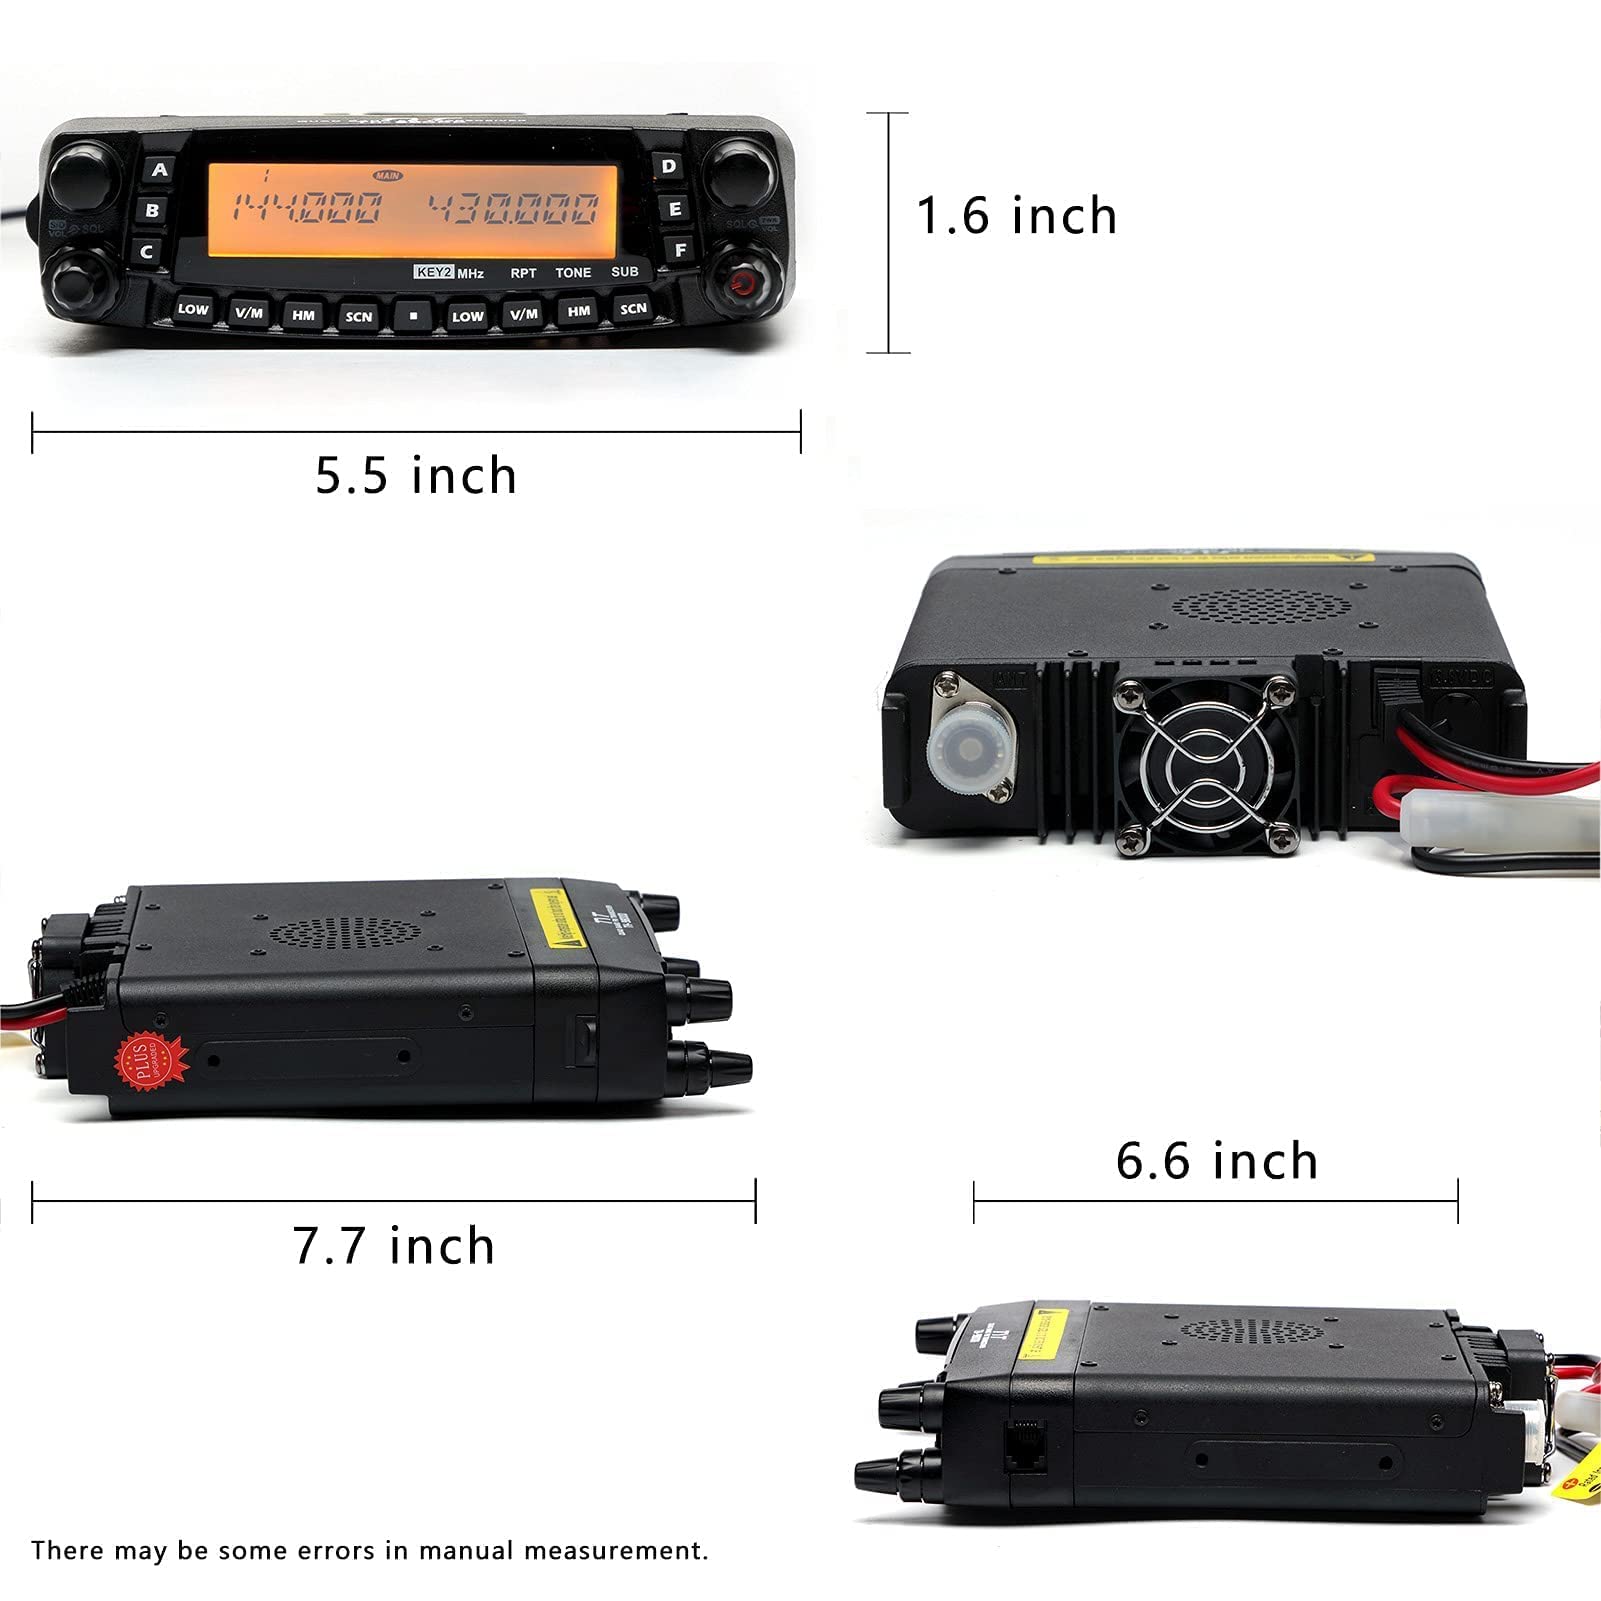 TYT TH-9800D Plus Version Quad Band Cross-Band 50W Mobile Transceiver with Quad Band Mobile Radio Antenna